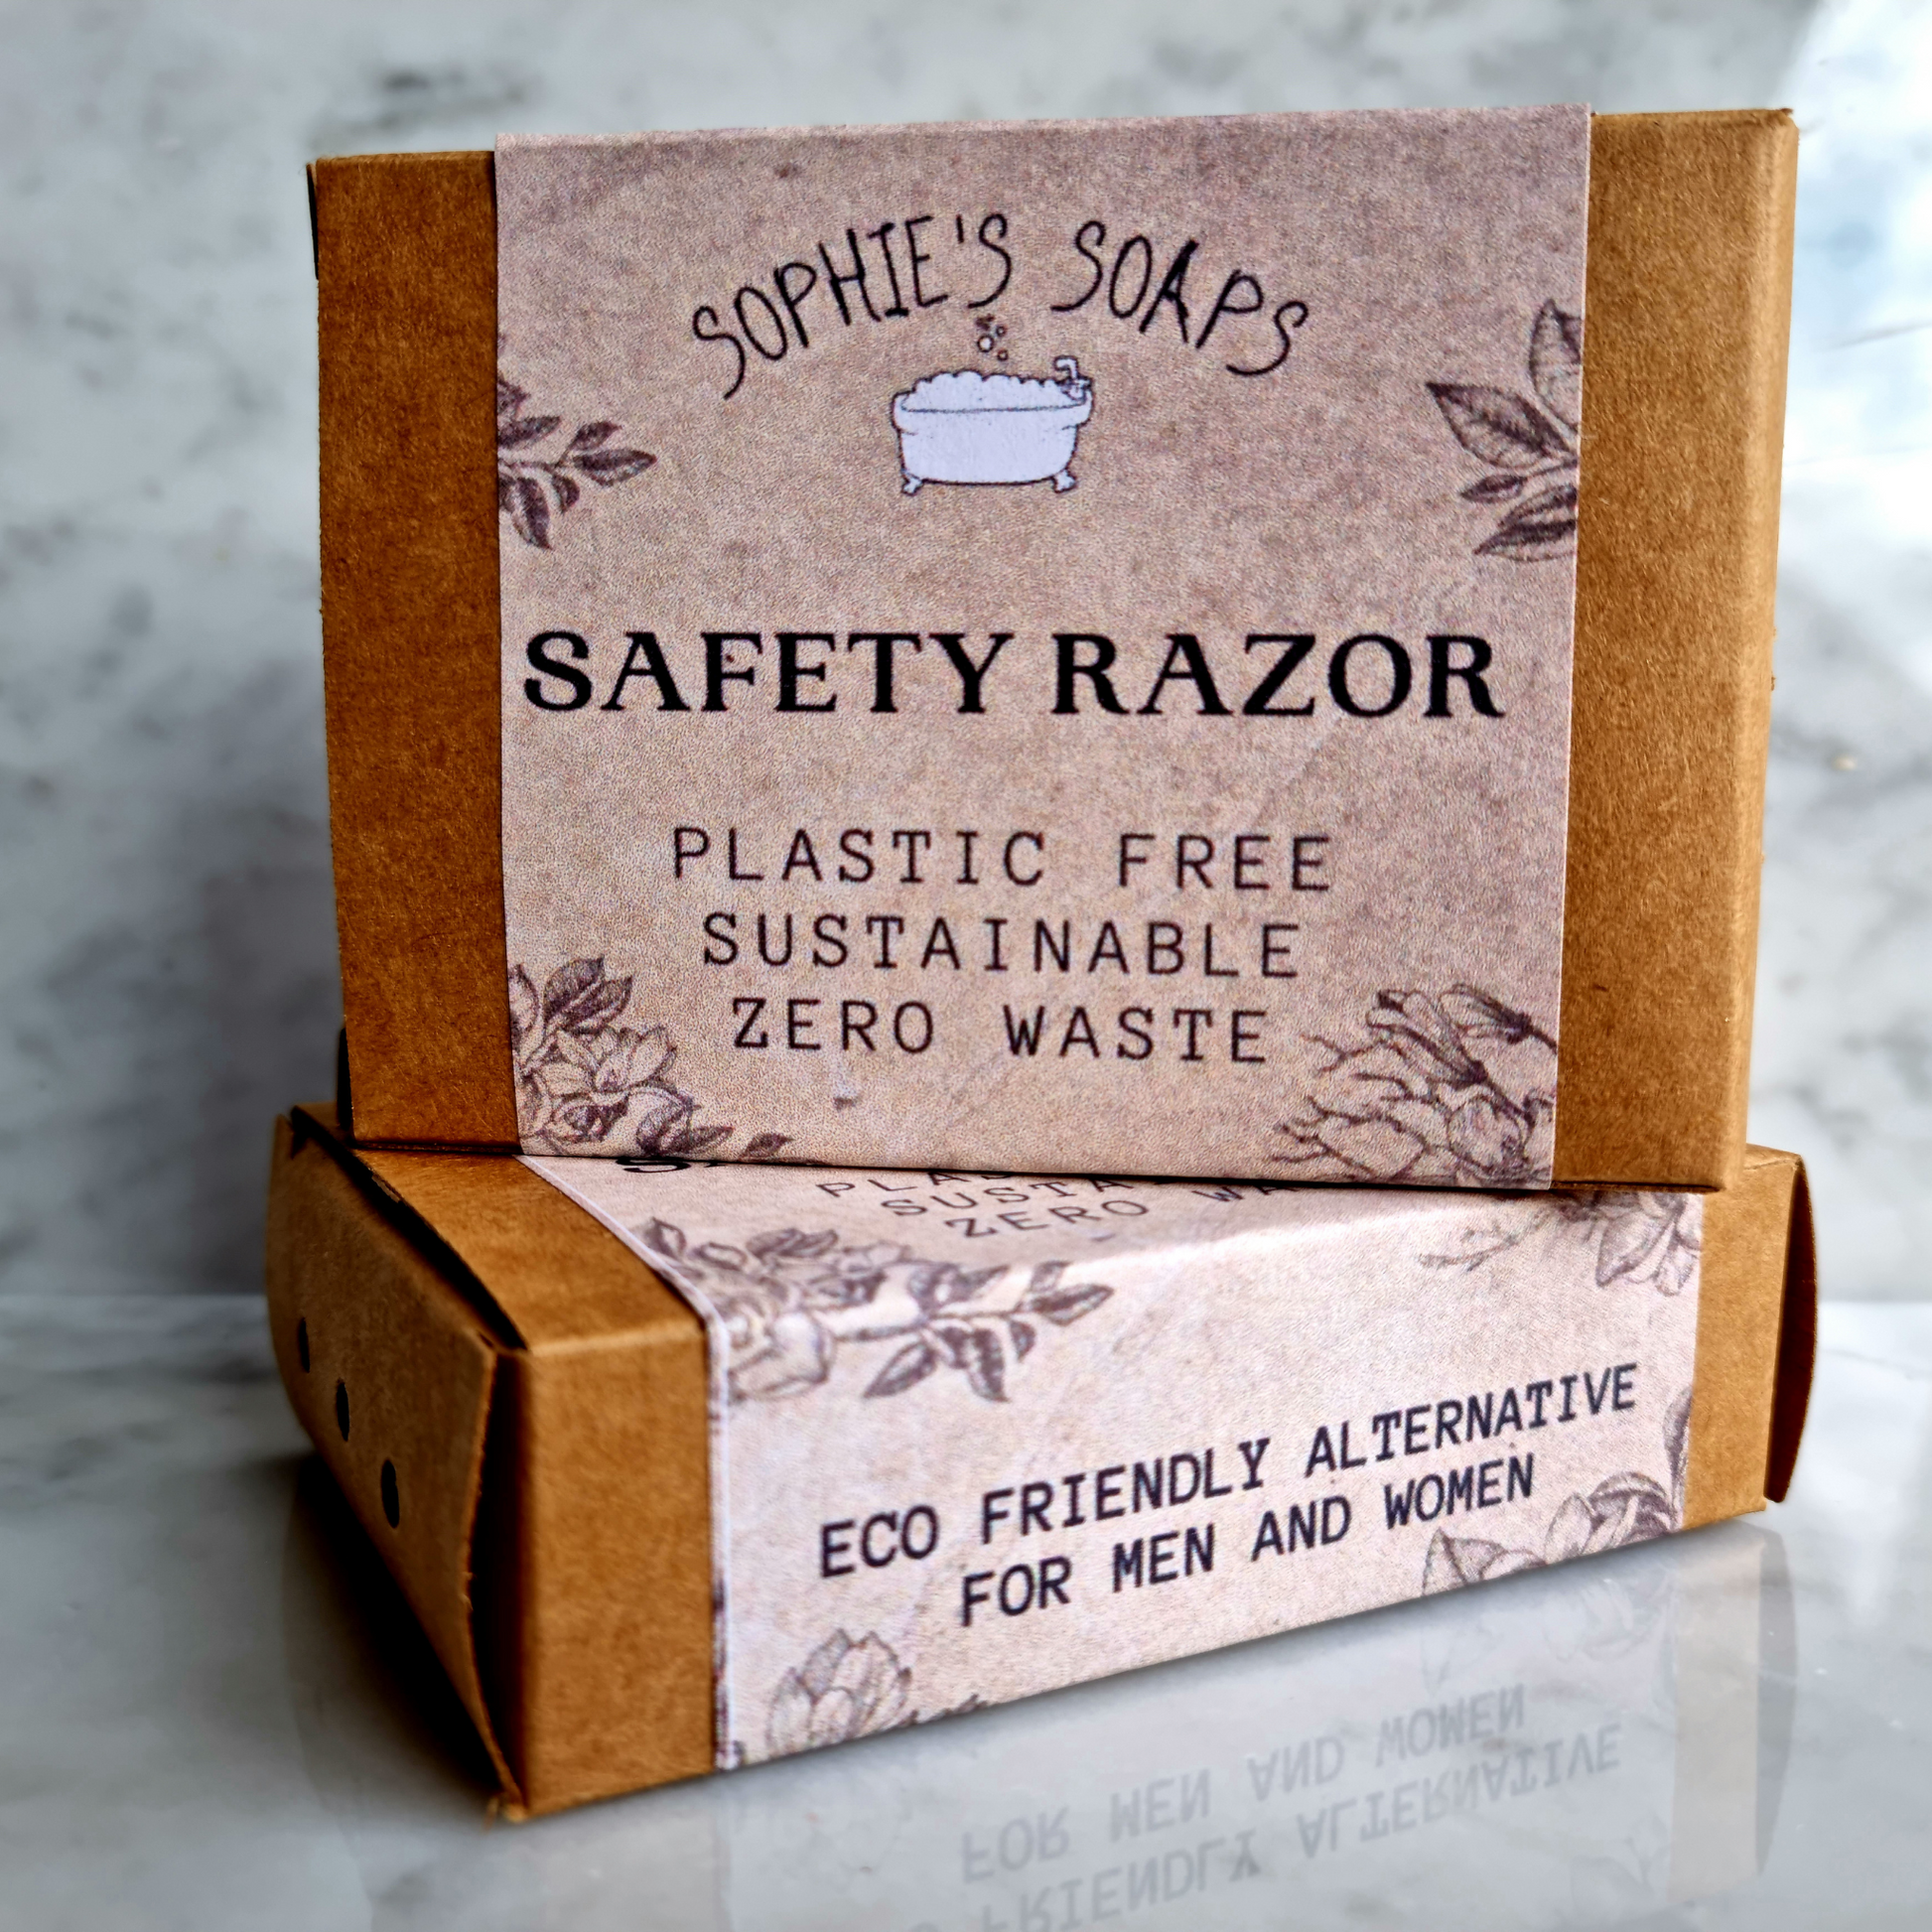 Stainless Steel Safety Razor - Sophie's Soaps